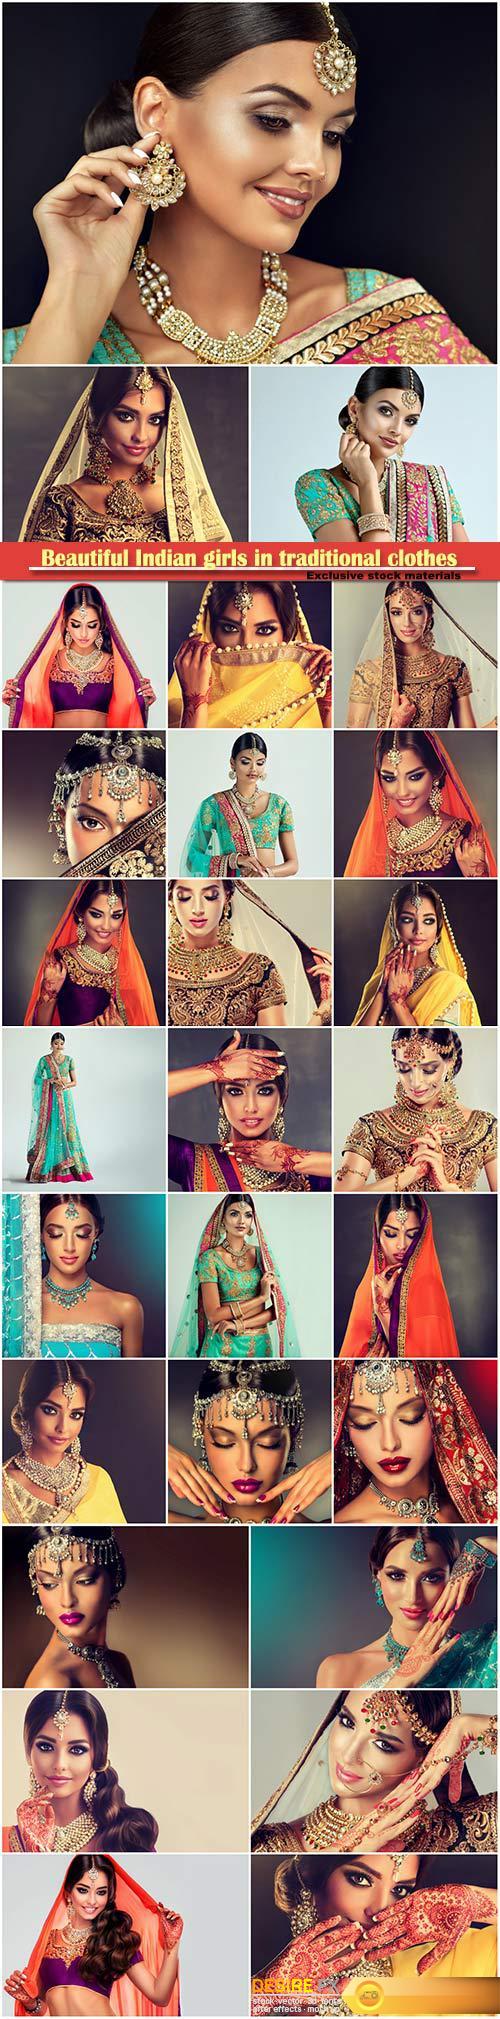 Beautiful Indian girls in traditional clothes, beautiful make-up, women with beautiful jewelry